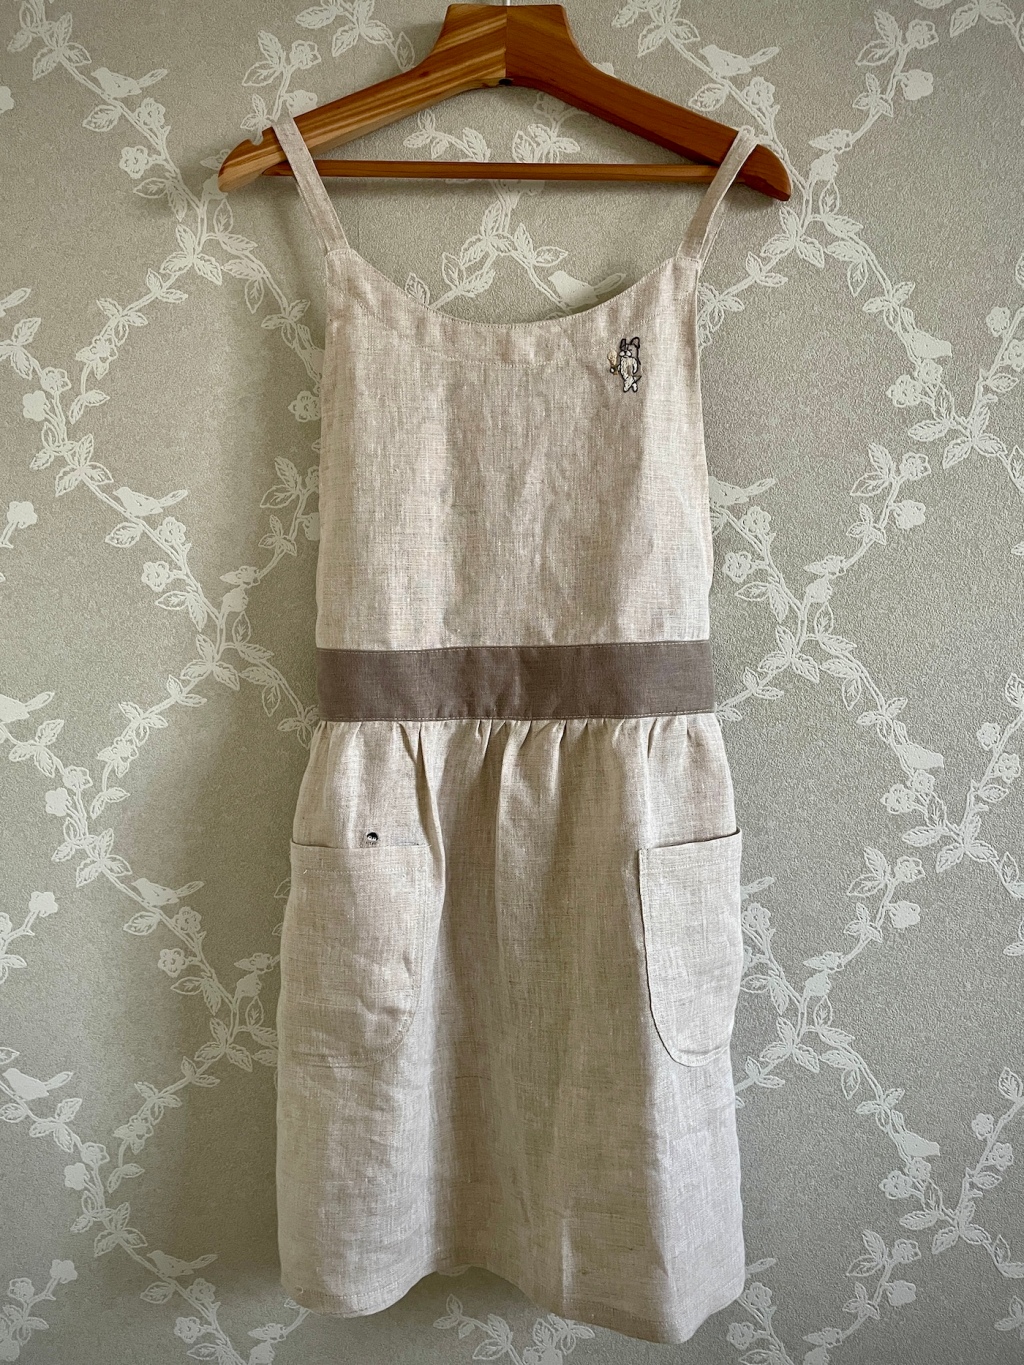 a Japanese Apron with Embroideries